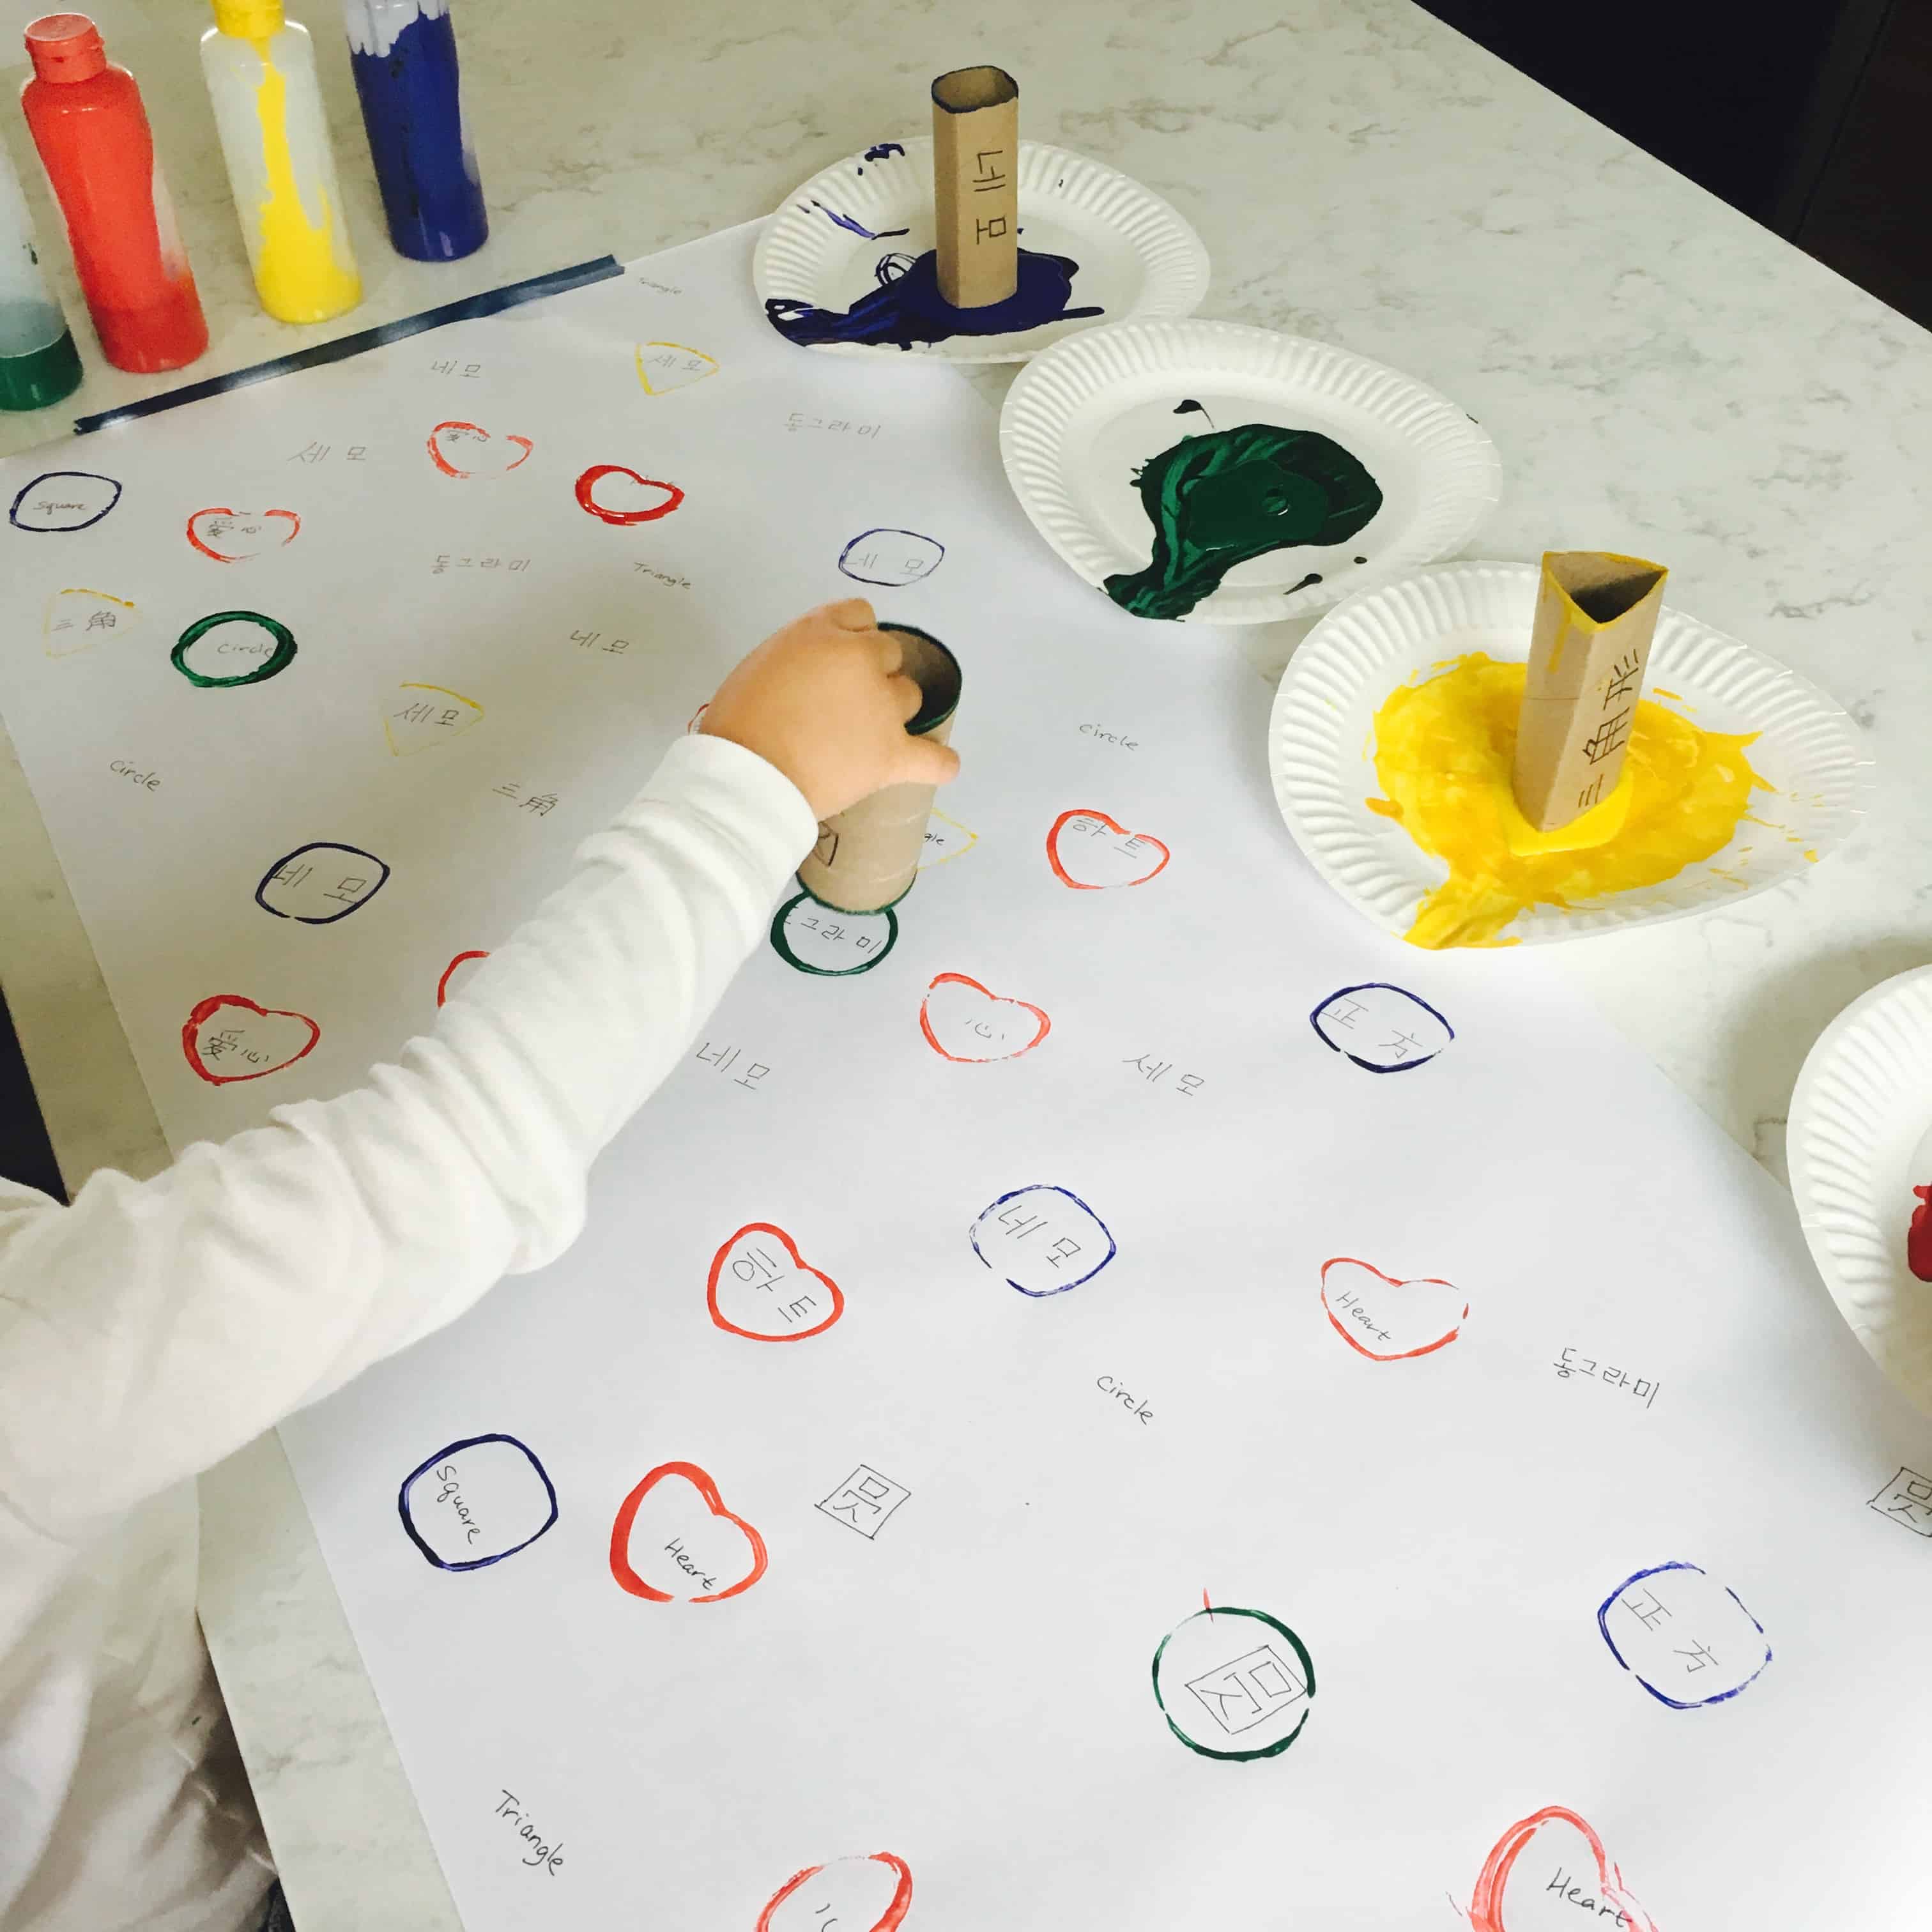 Paper roll shape stamping - recycled learning activity for kids